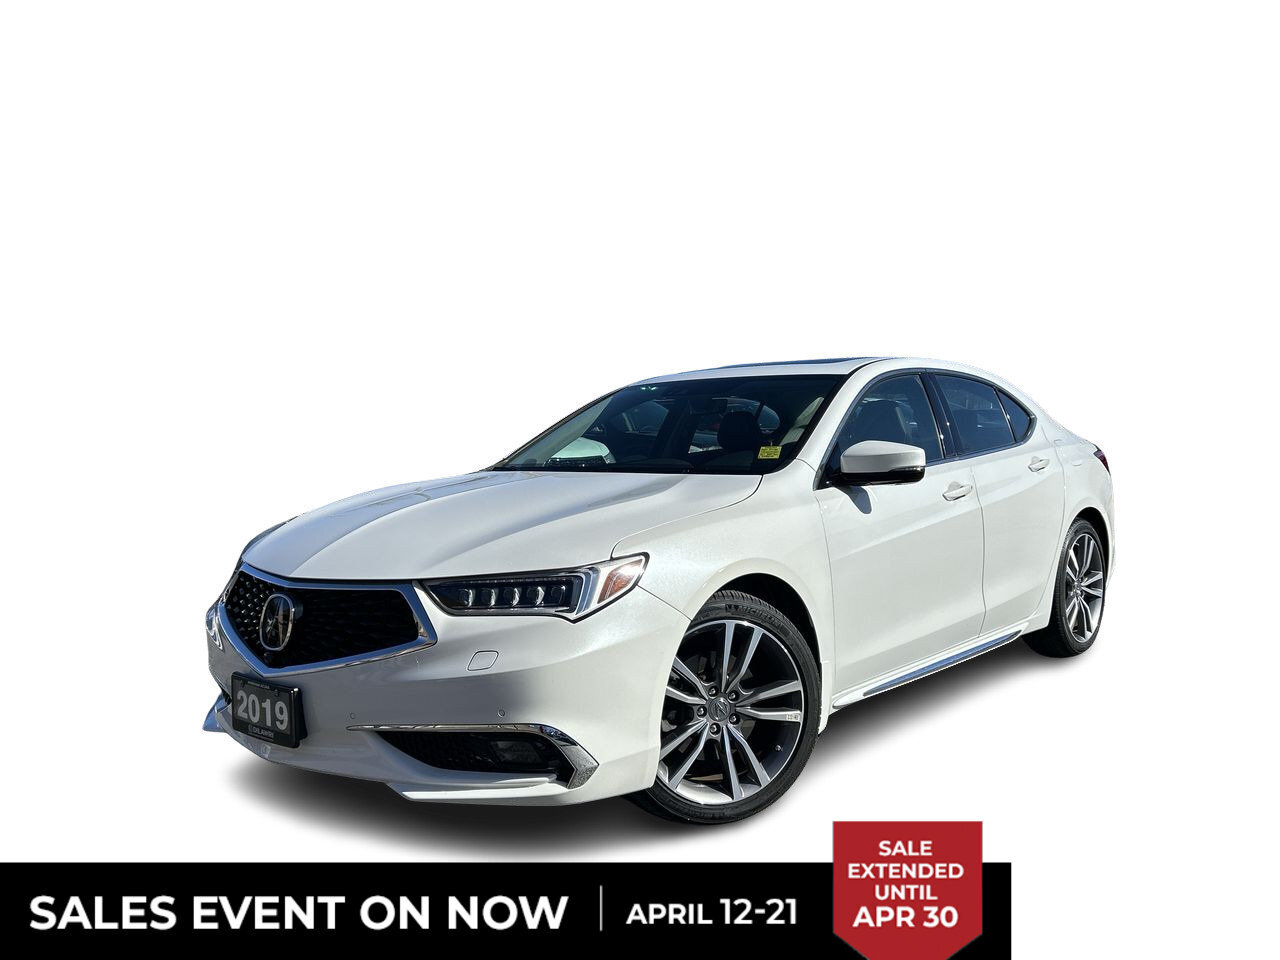 2019 Acura TLX 3.5L SH-AWD Elite Wireless Charger | Vented Seats 